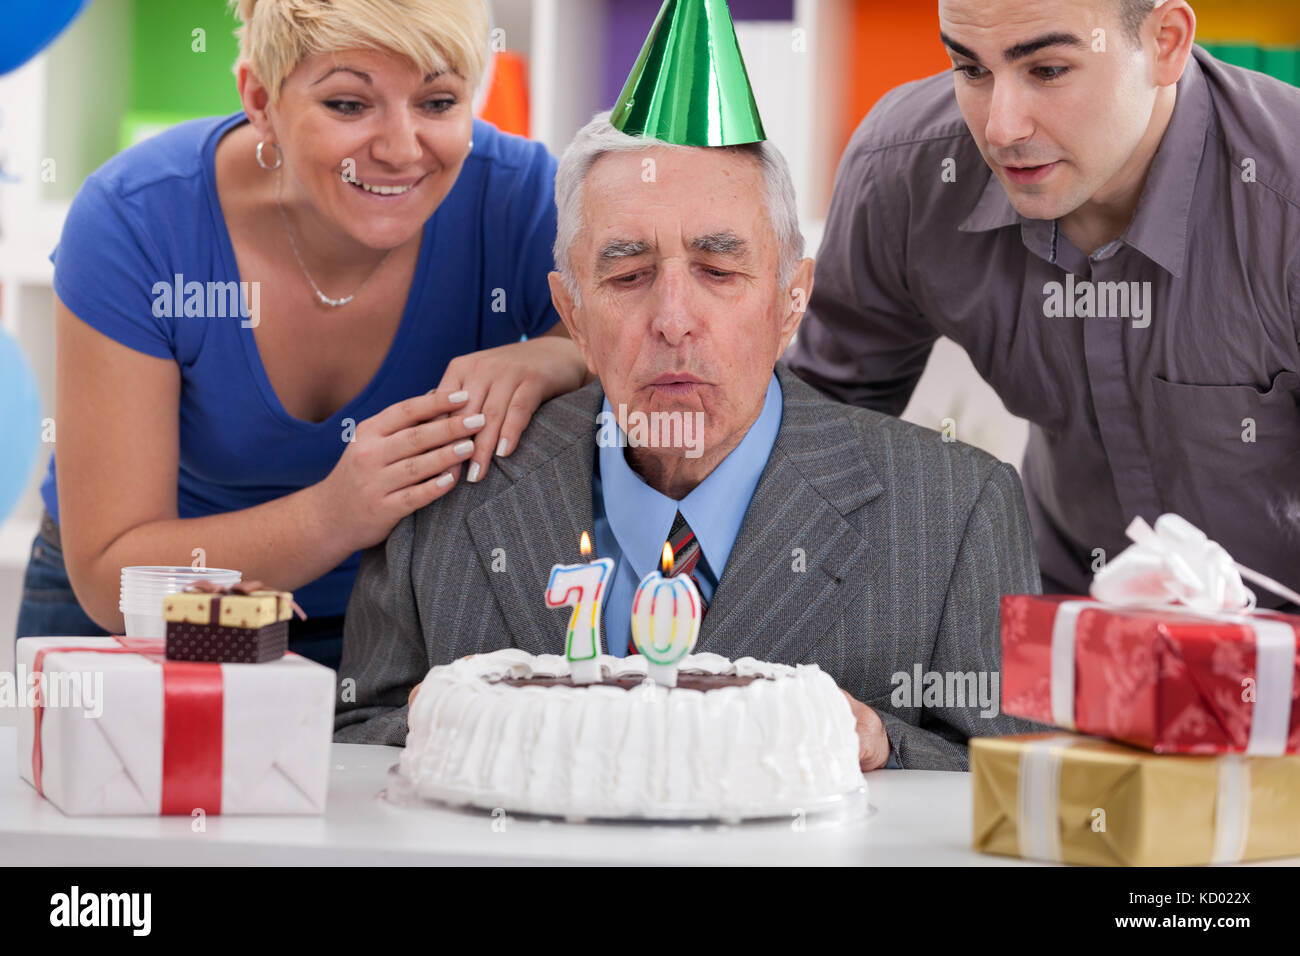 family together blowing in  the candles on birthday cake Stock Photo